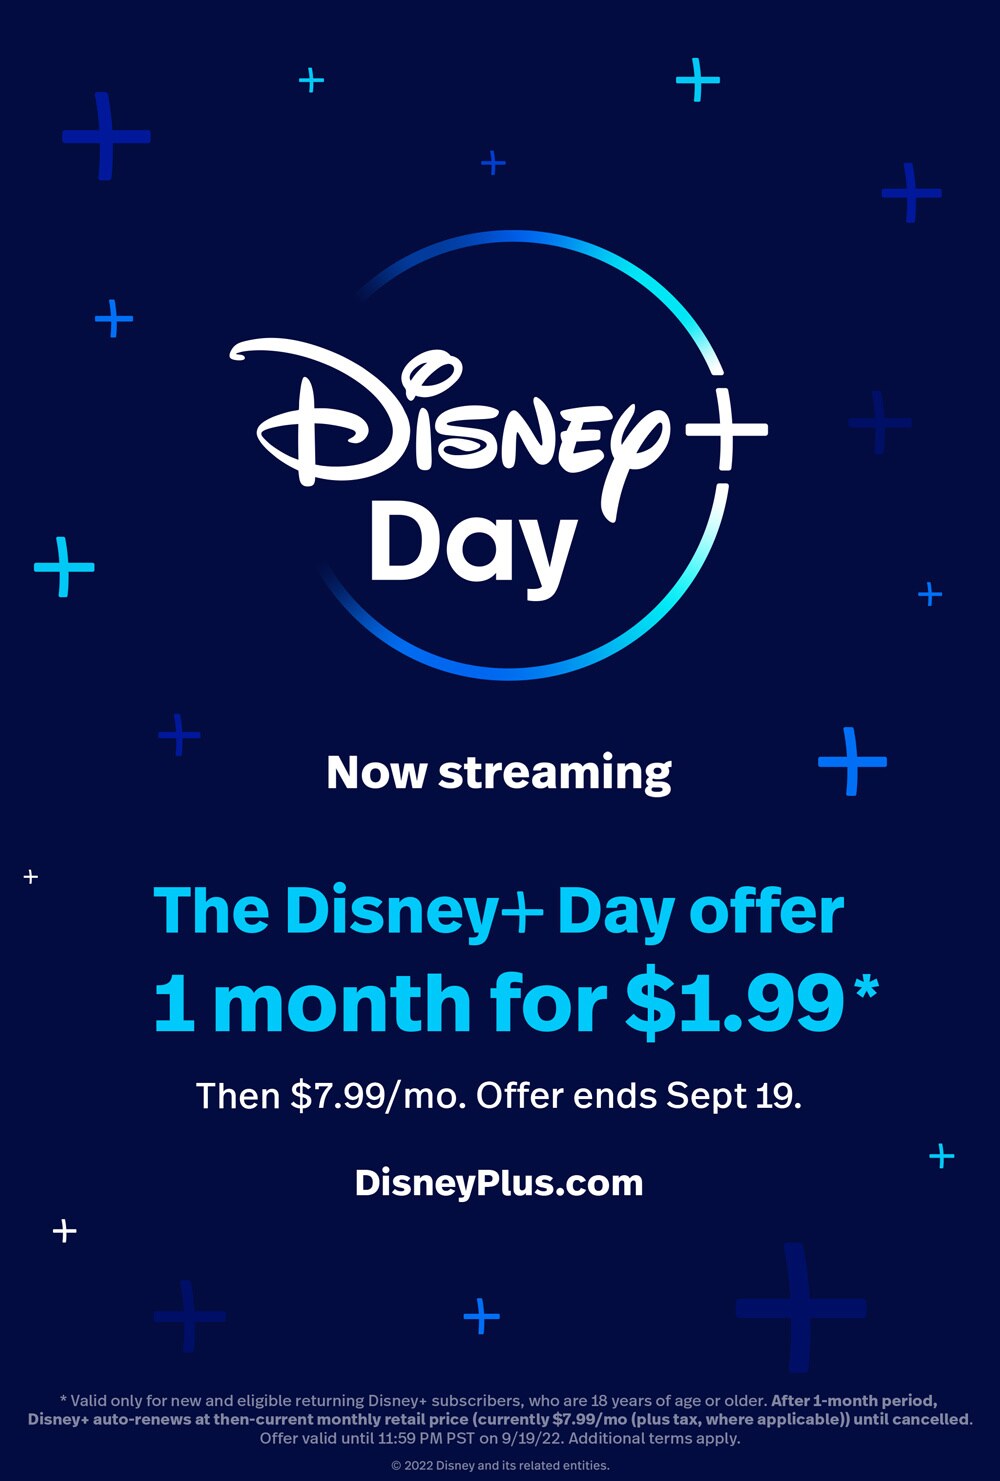 Disney+ Day Offer - See terms and restrictions below.